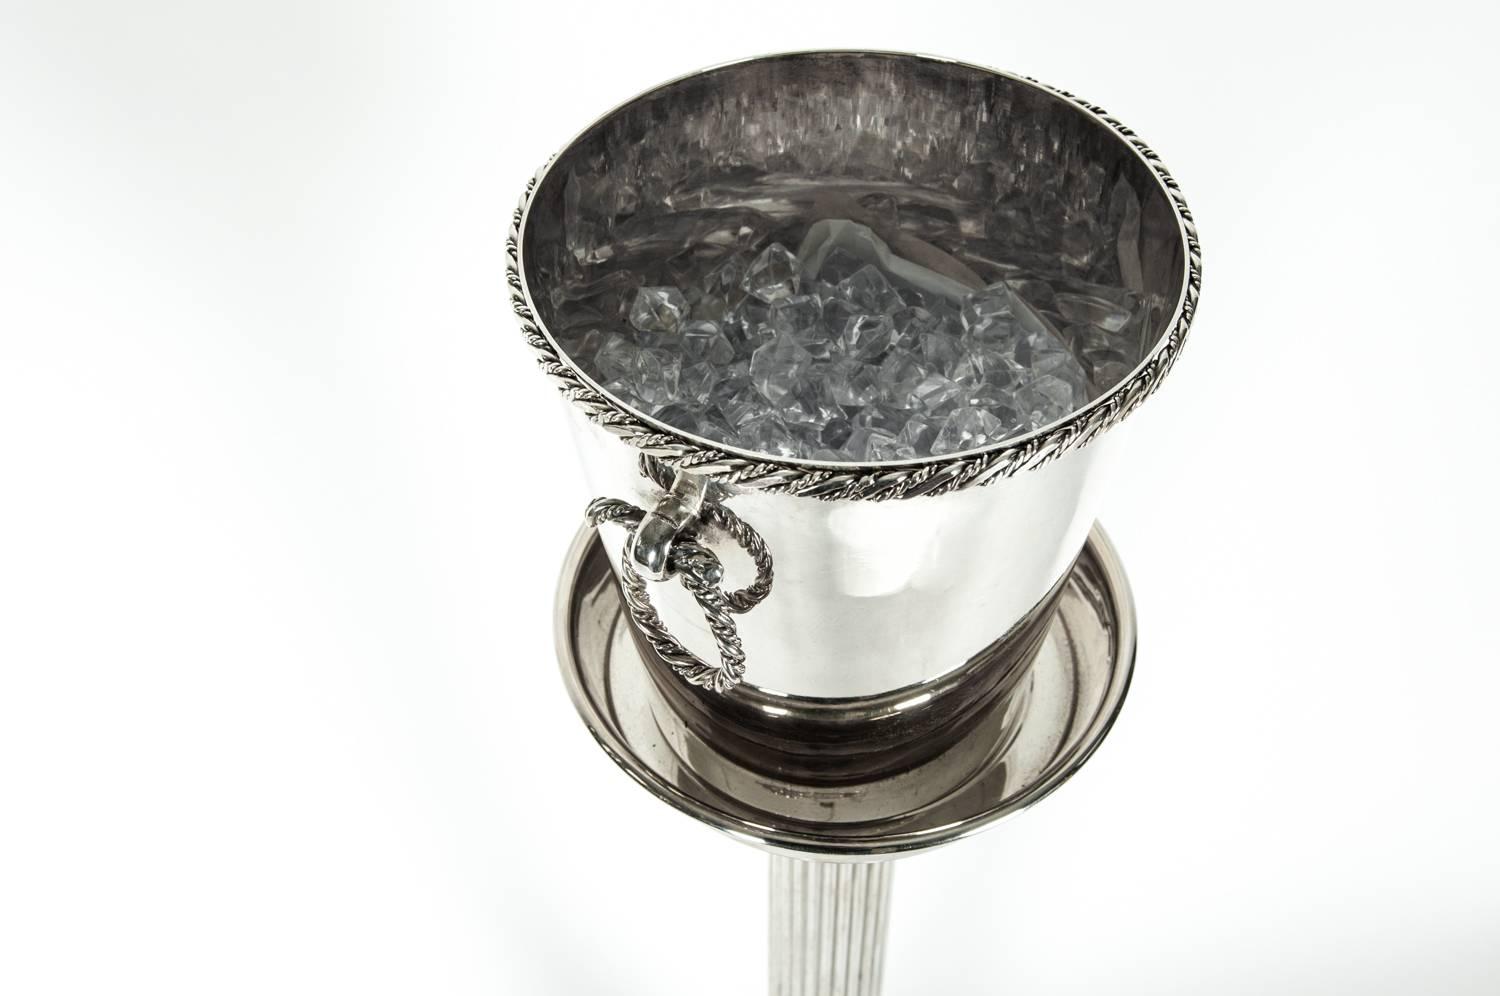 Mid-Century Modern silver plate ice bucket/wine cooler by Christian Dior manufactured in France, circa 1960s with stand. The ice bucket measure 8 inches high X 7.5 inches top diameter. Maker's mark undersigned. The stand's by Birks measure about 25